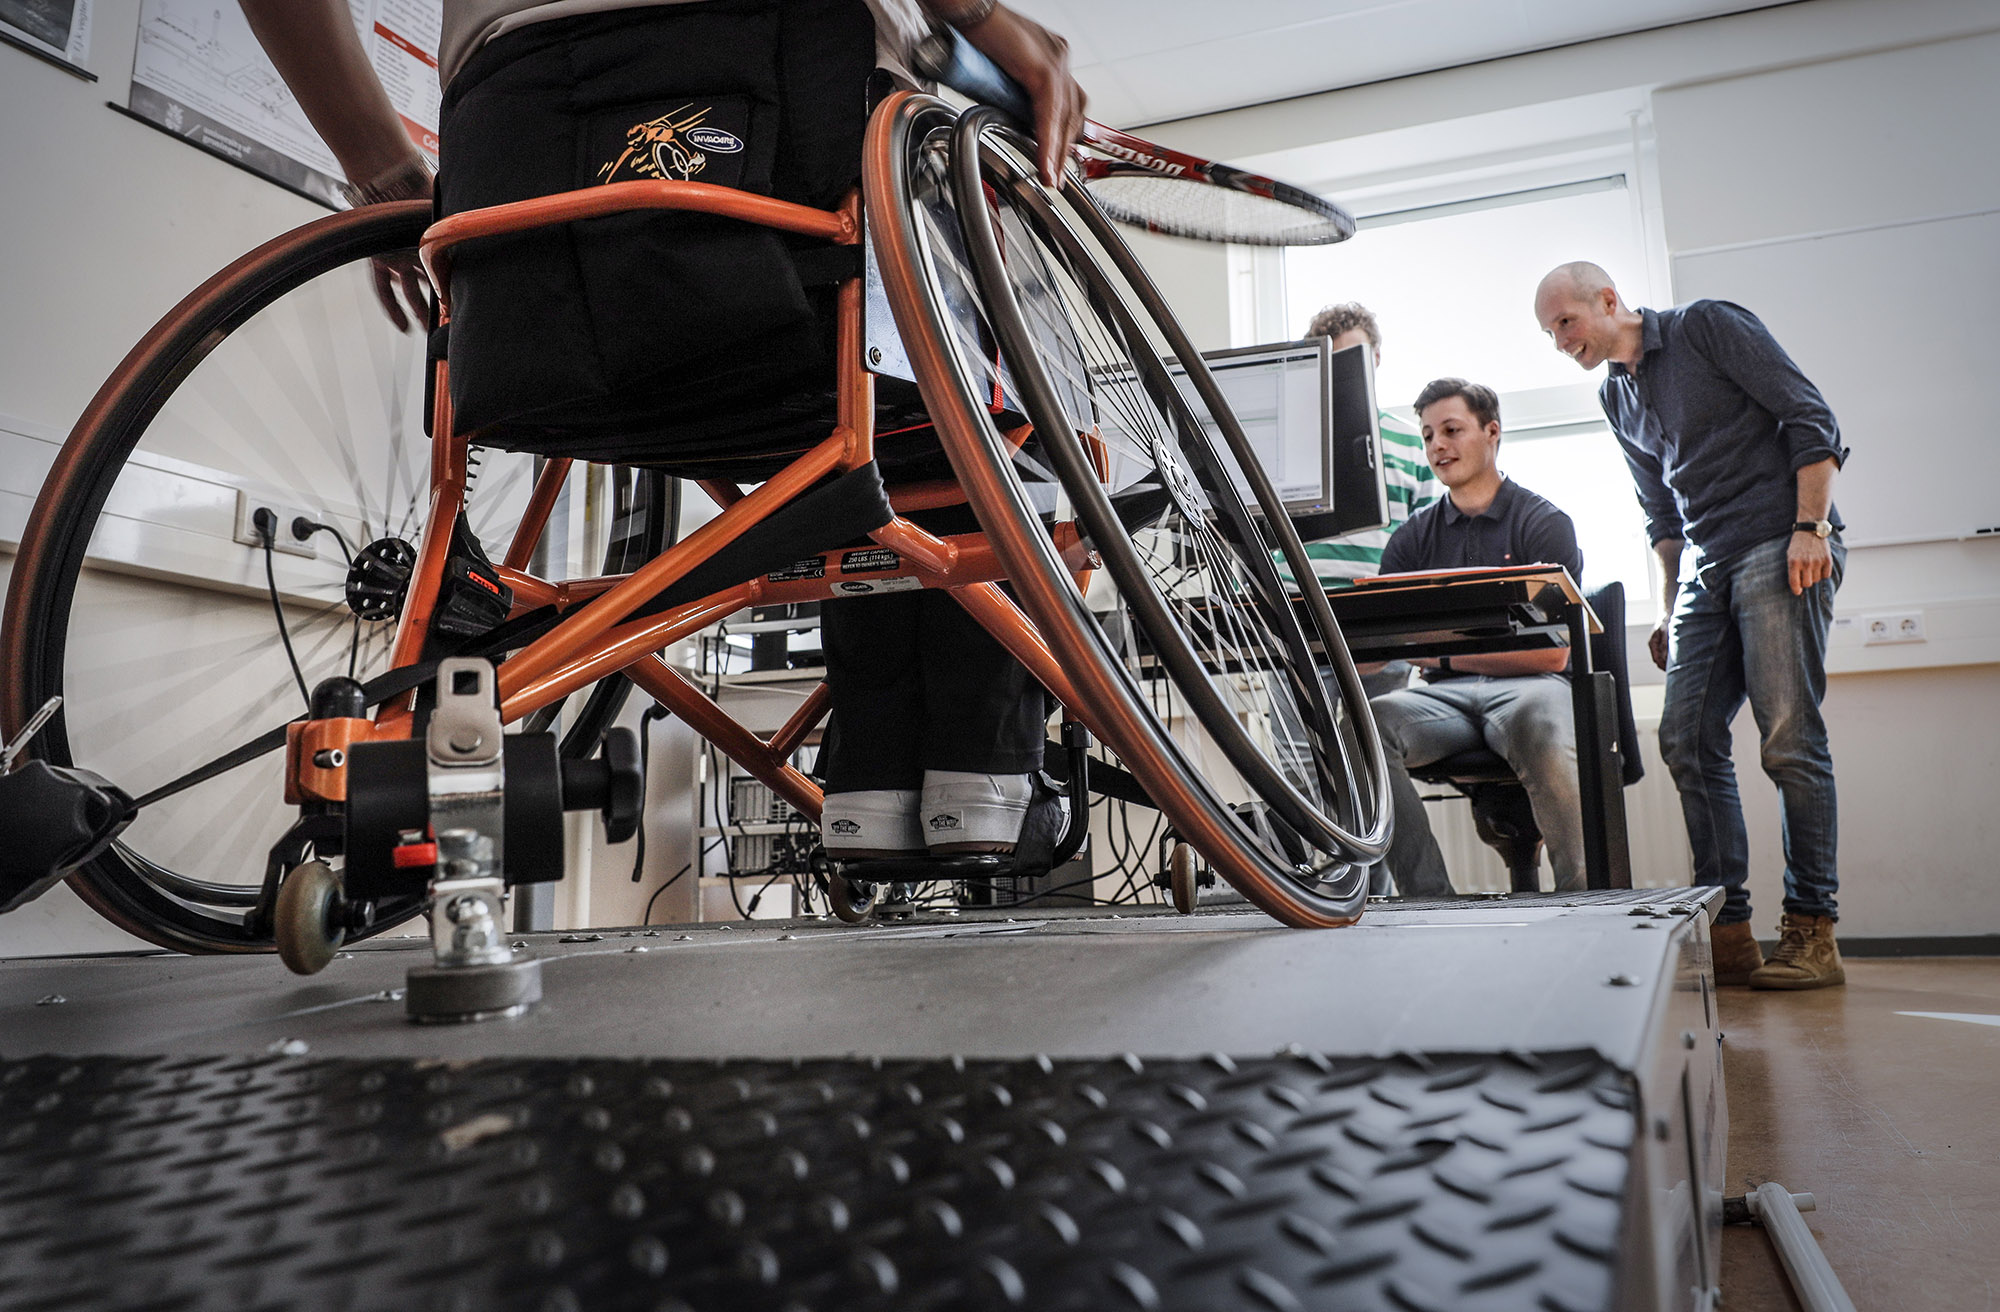 In the paralympic research lab, researchers are working on optimizing movement for wheelchair athletes.